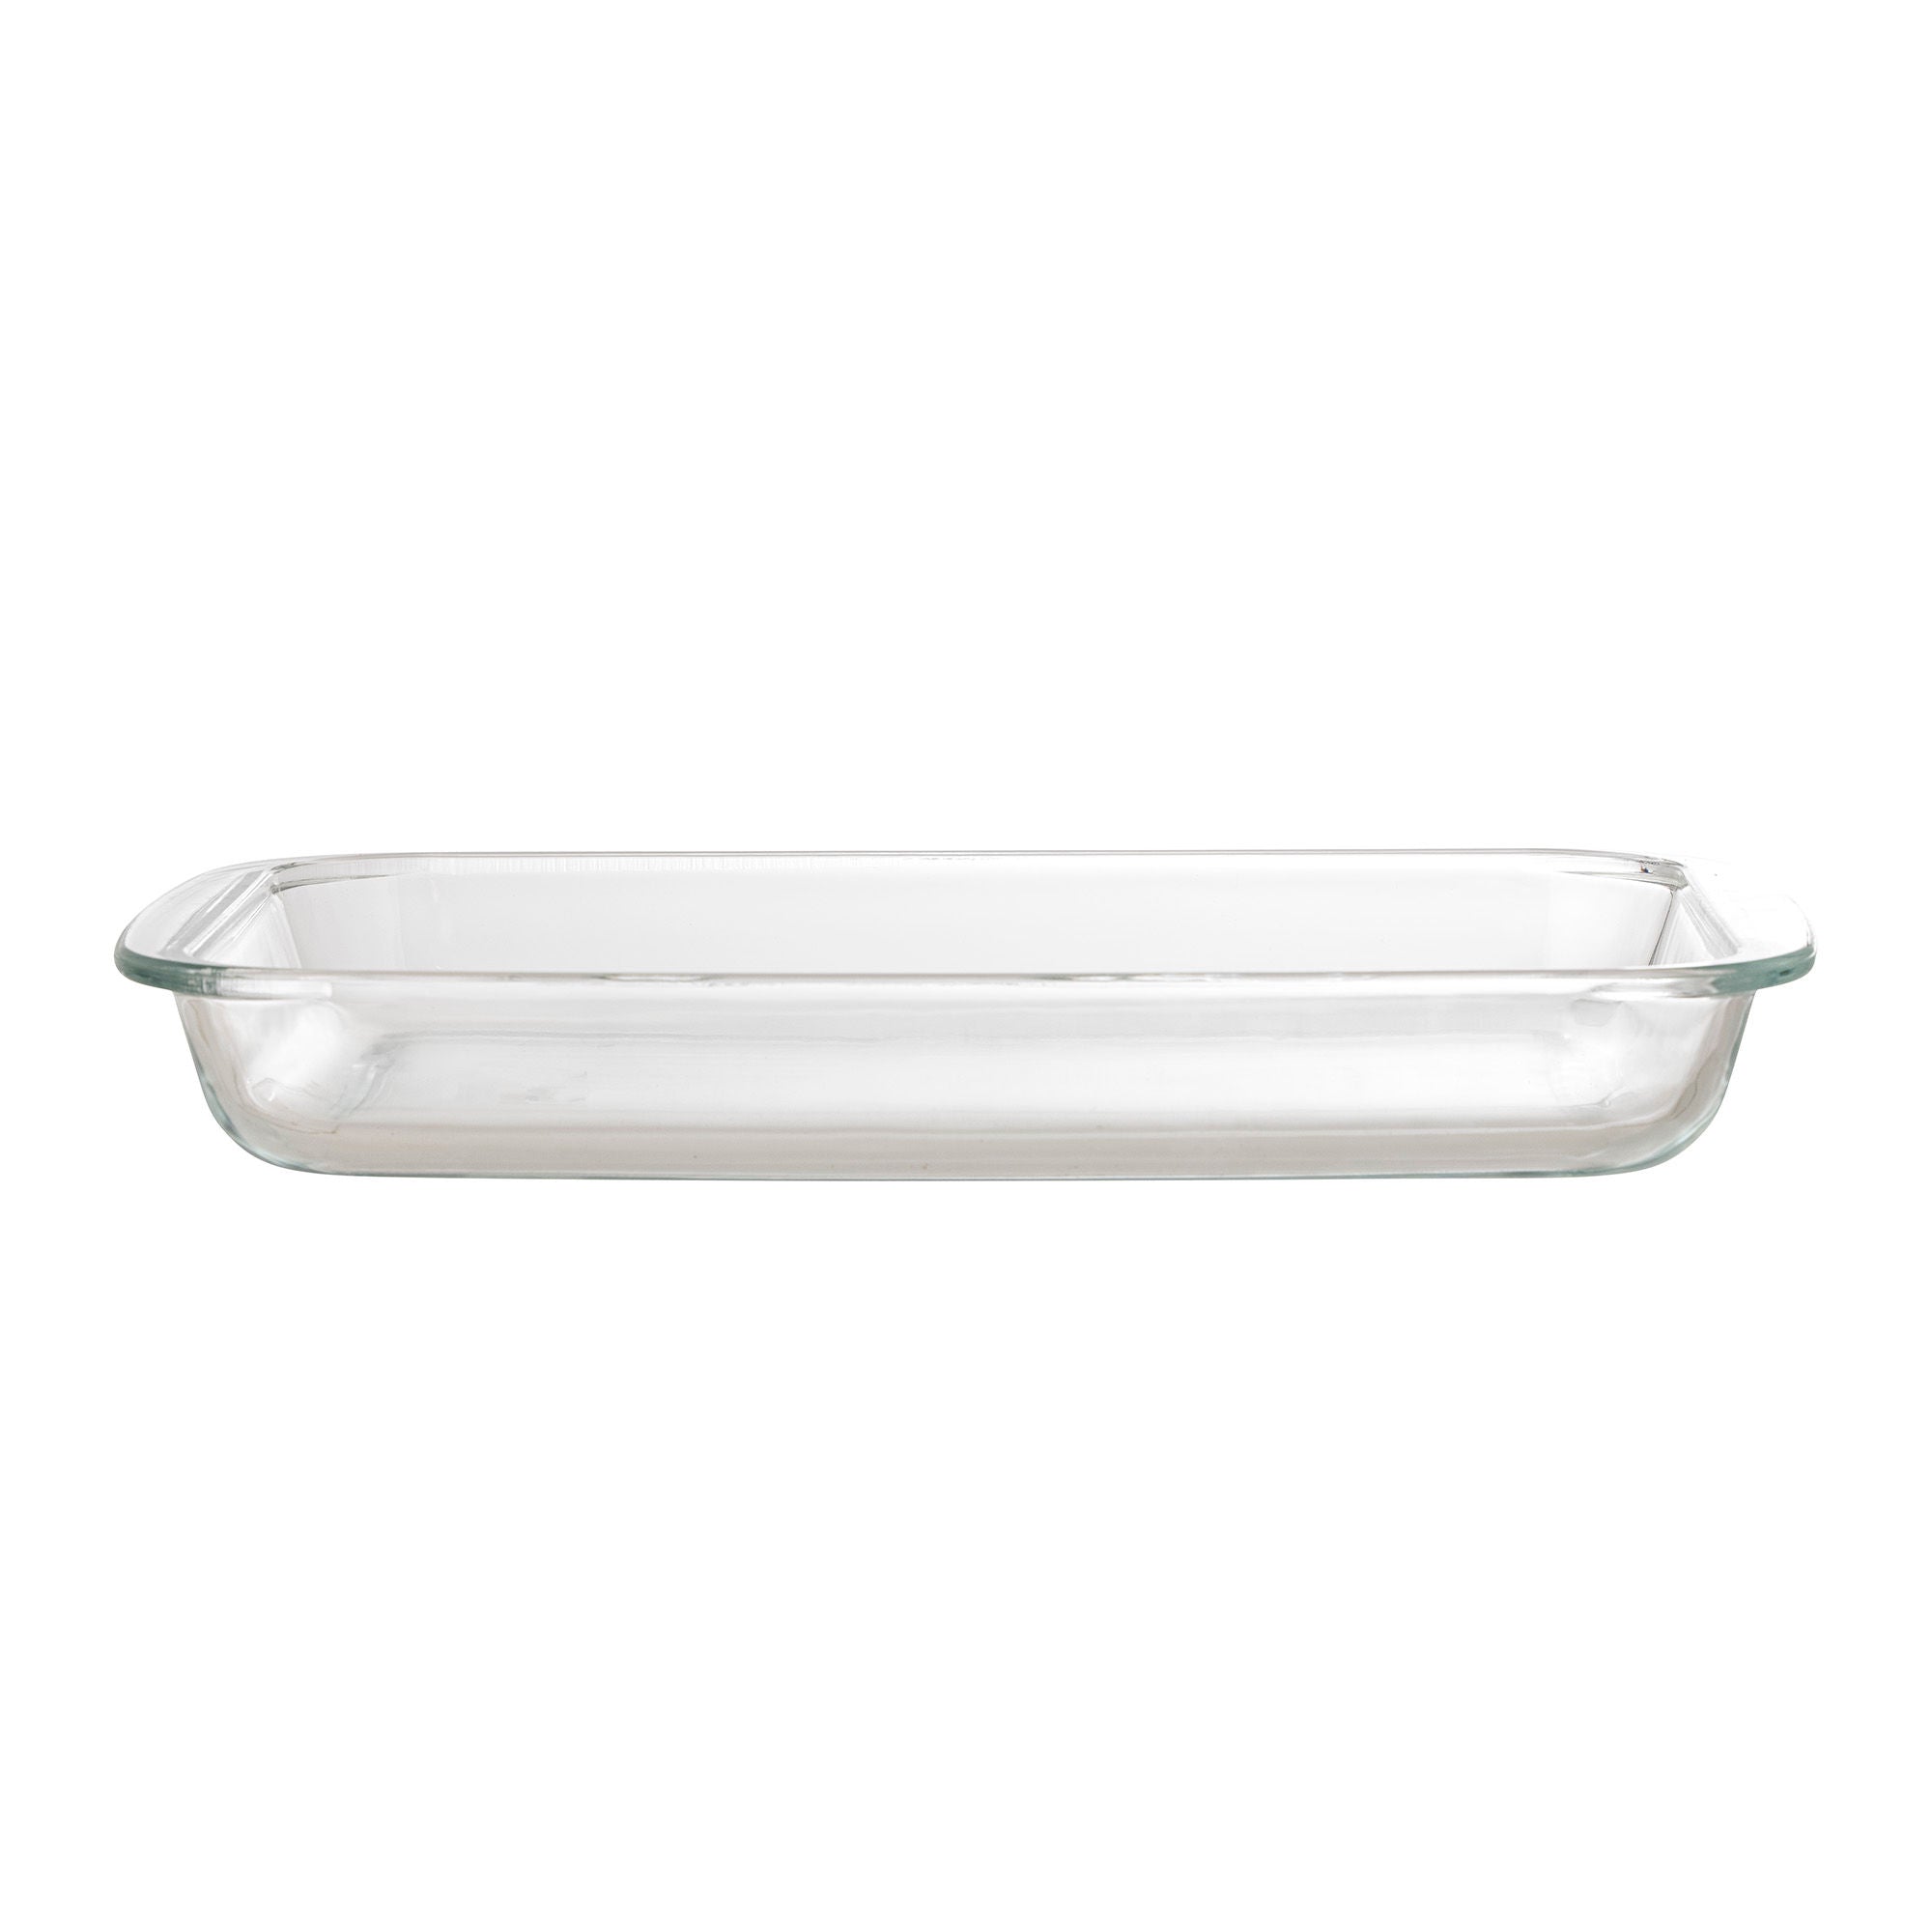 Bloomingville Mariam Oven Dish w/Basket, Clear, Glass